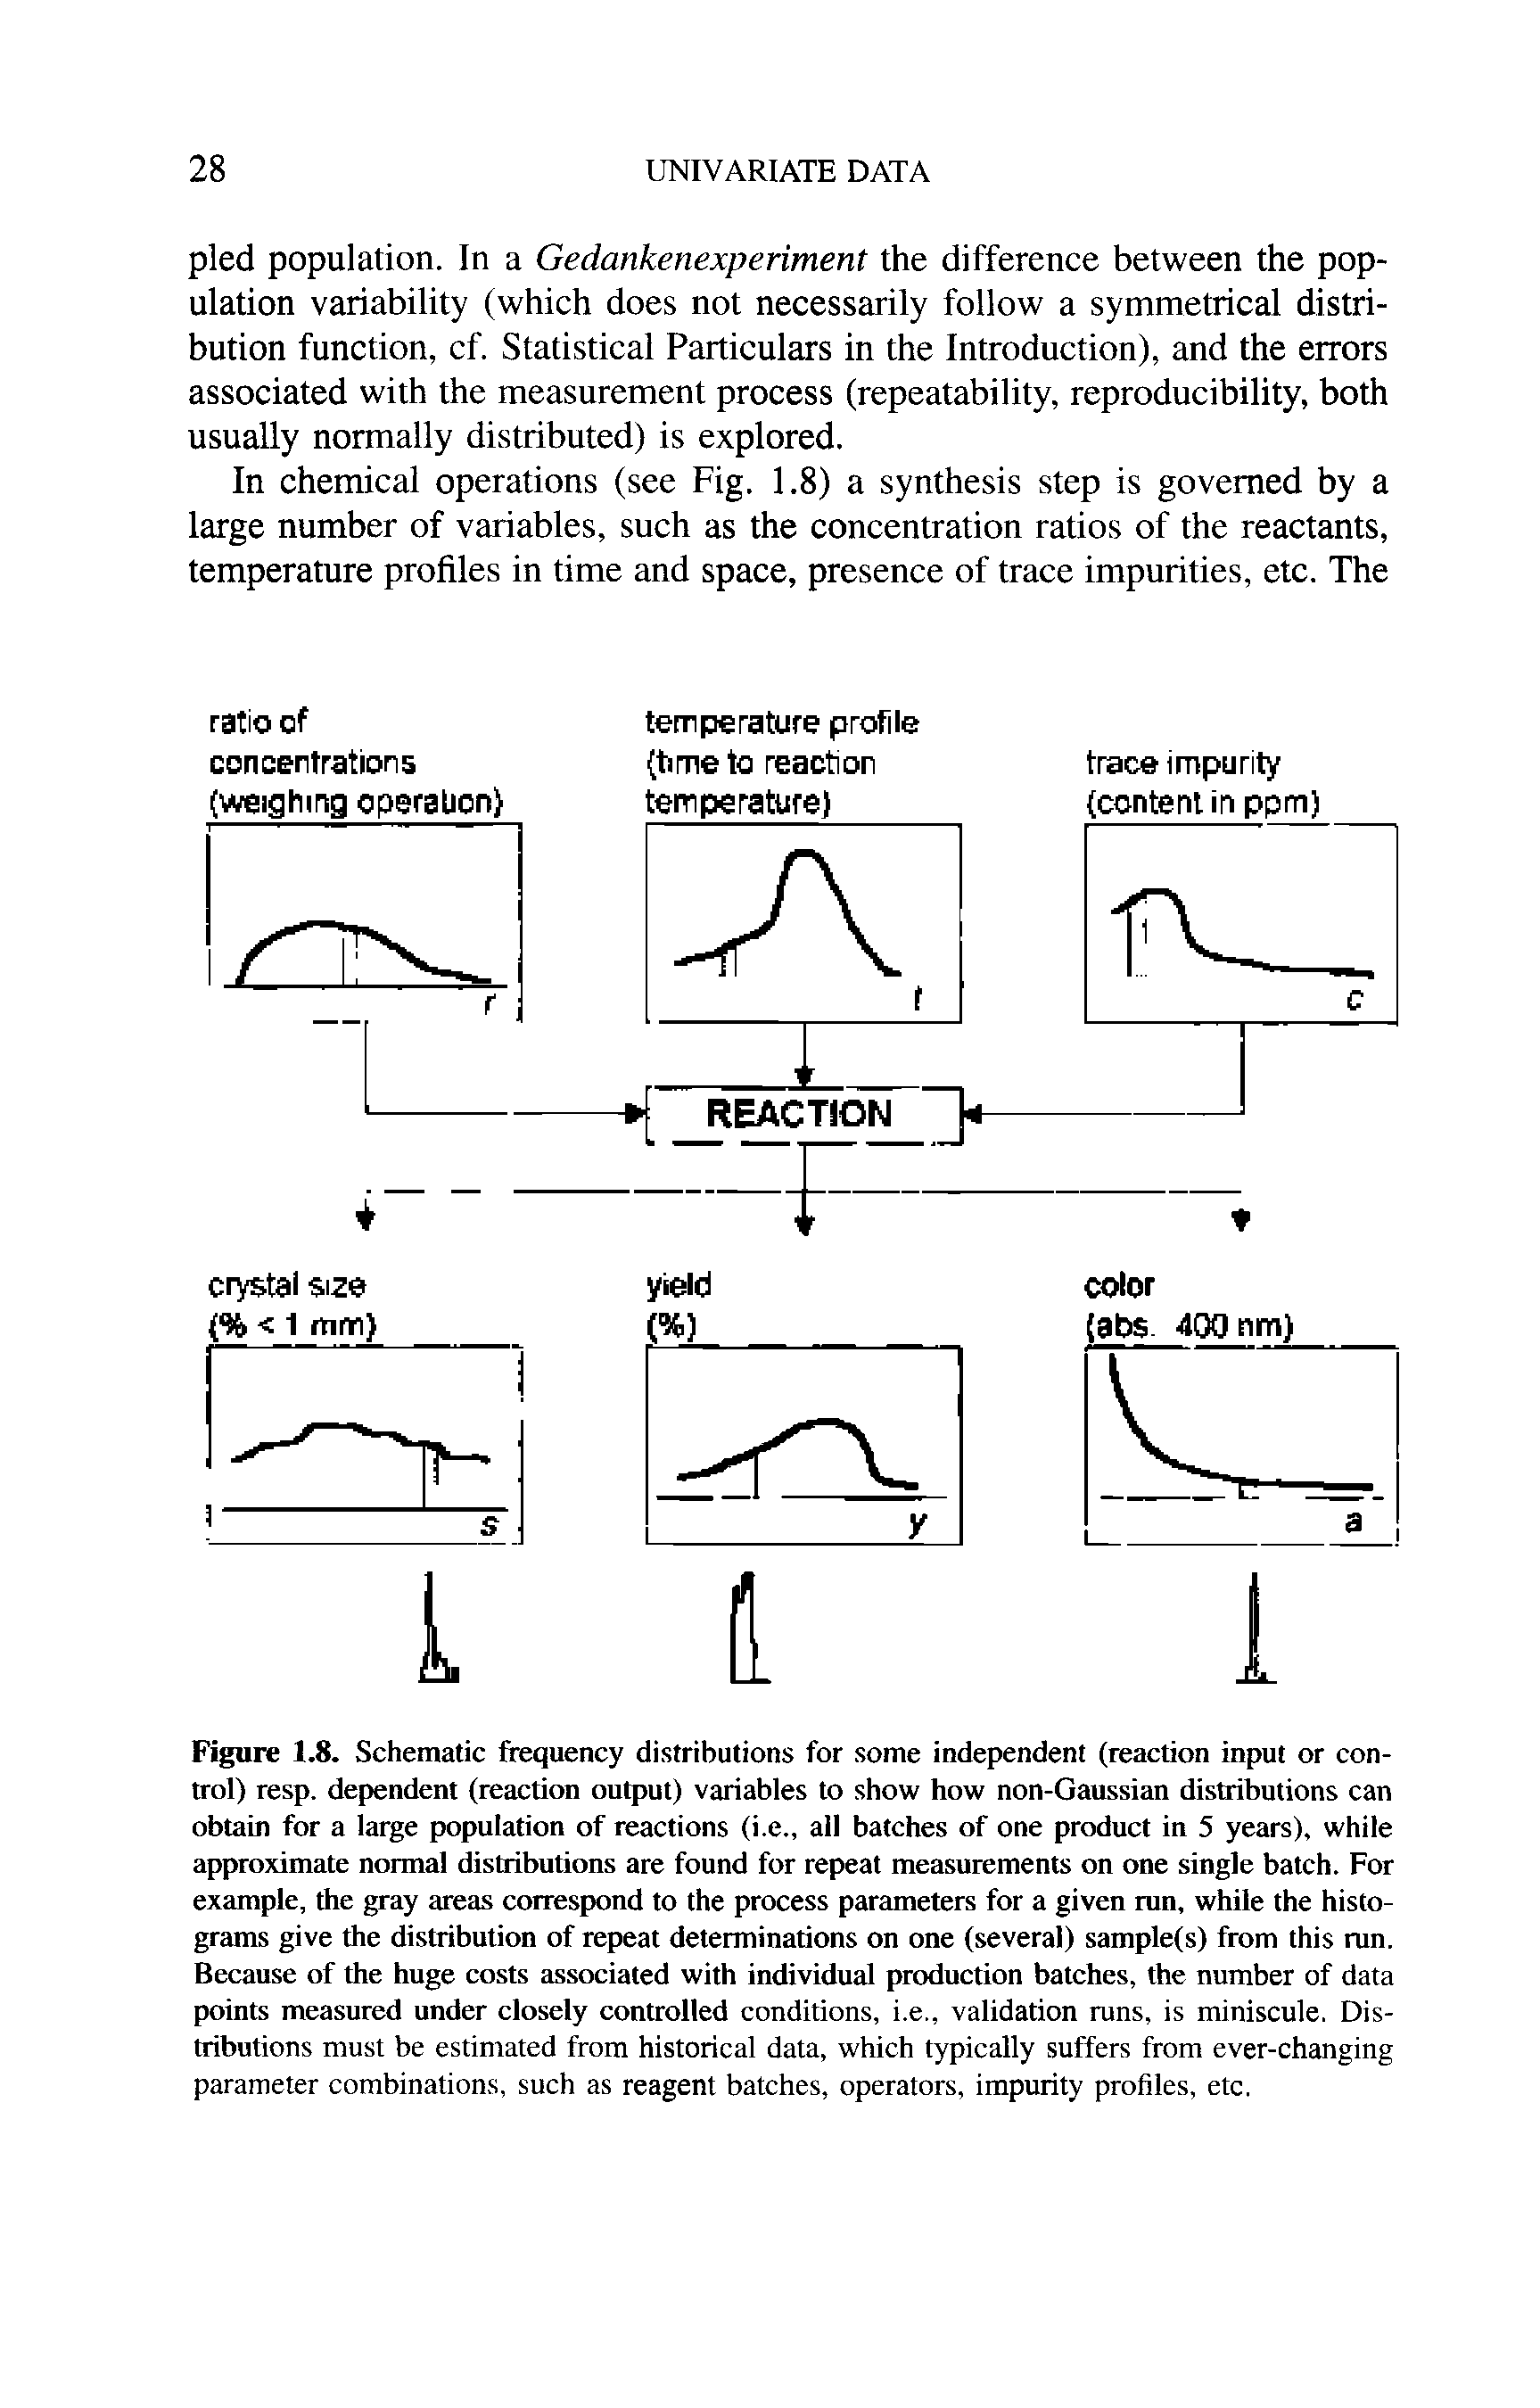 Figure 1.8. Schematic frequency distributions for some independent (reaction input or control) resp. dependent (reaction output) variables to show how non-Gaussian distributions can obtain for a large population of reactions (i.e., all batches of one product in 5 years), while approximate normal distributions are found for repeat measurements on one single batch. For example, the gray areas correspond to the process parameters for a given run, while the histograms give the distribution of repeat determinations on one (several) sample(s) from this run. Because of the huge costs associated with individual production batches, the number of data points measured under closely controlled conditions, i.e., validation runs, is miniscule. Distributions must be estimated from historical data, which typically suffers from ever-changing parameter combinations, such as reagent batches, operators, impurity profiles, etc.